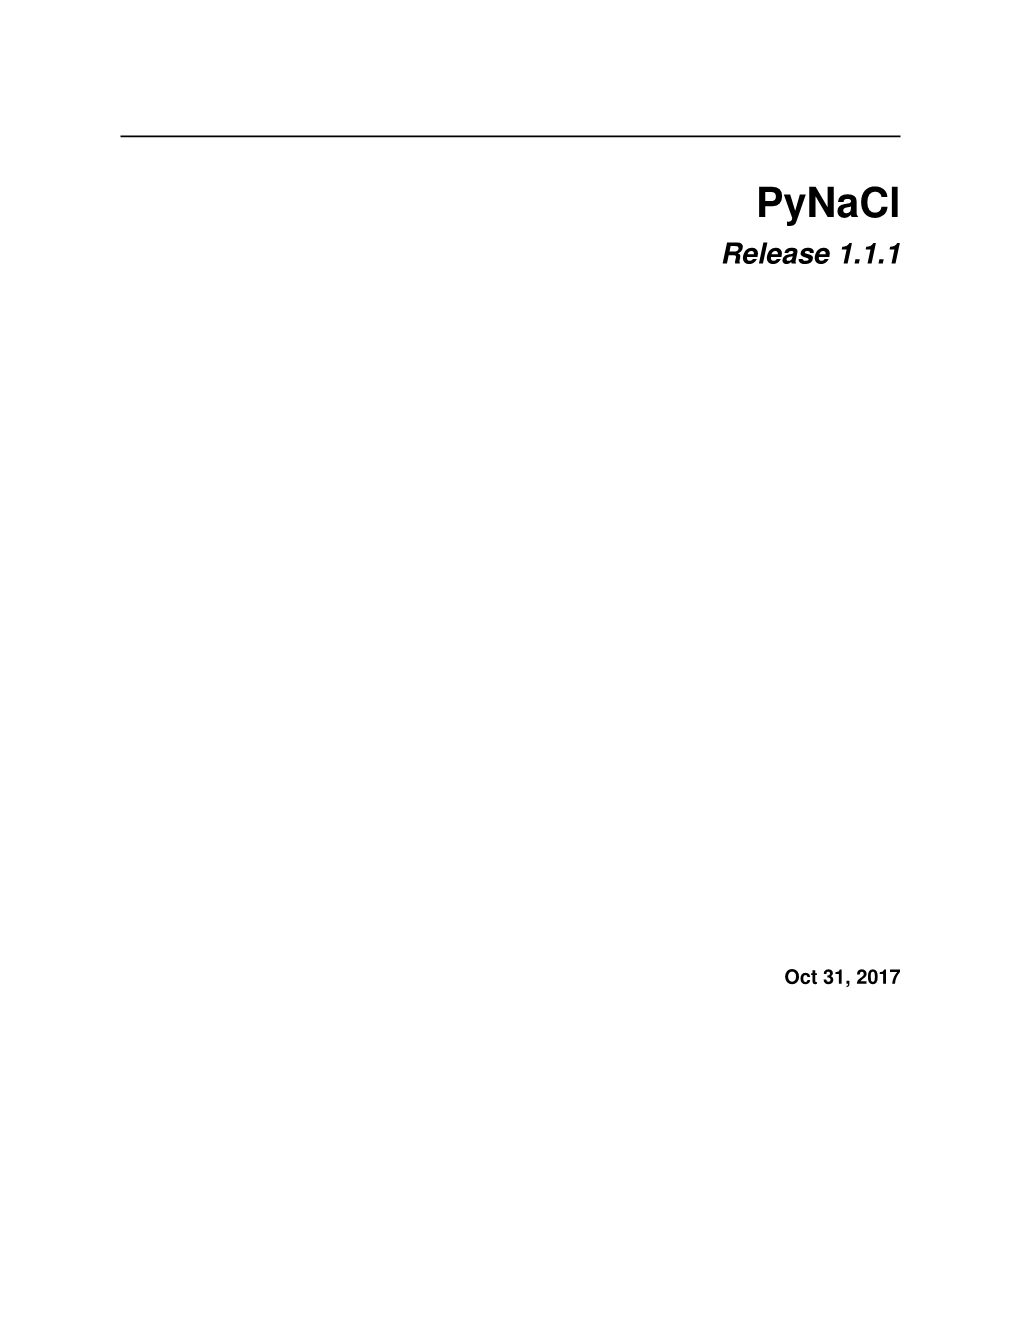 Pynacl Release 1.1.1